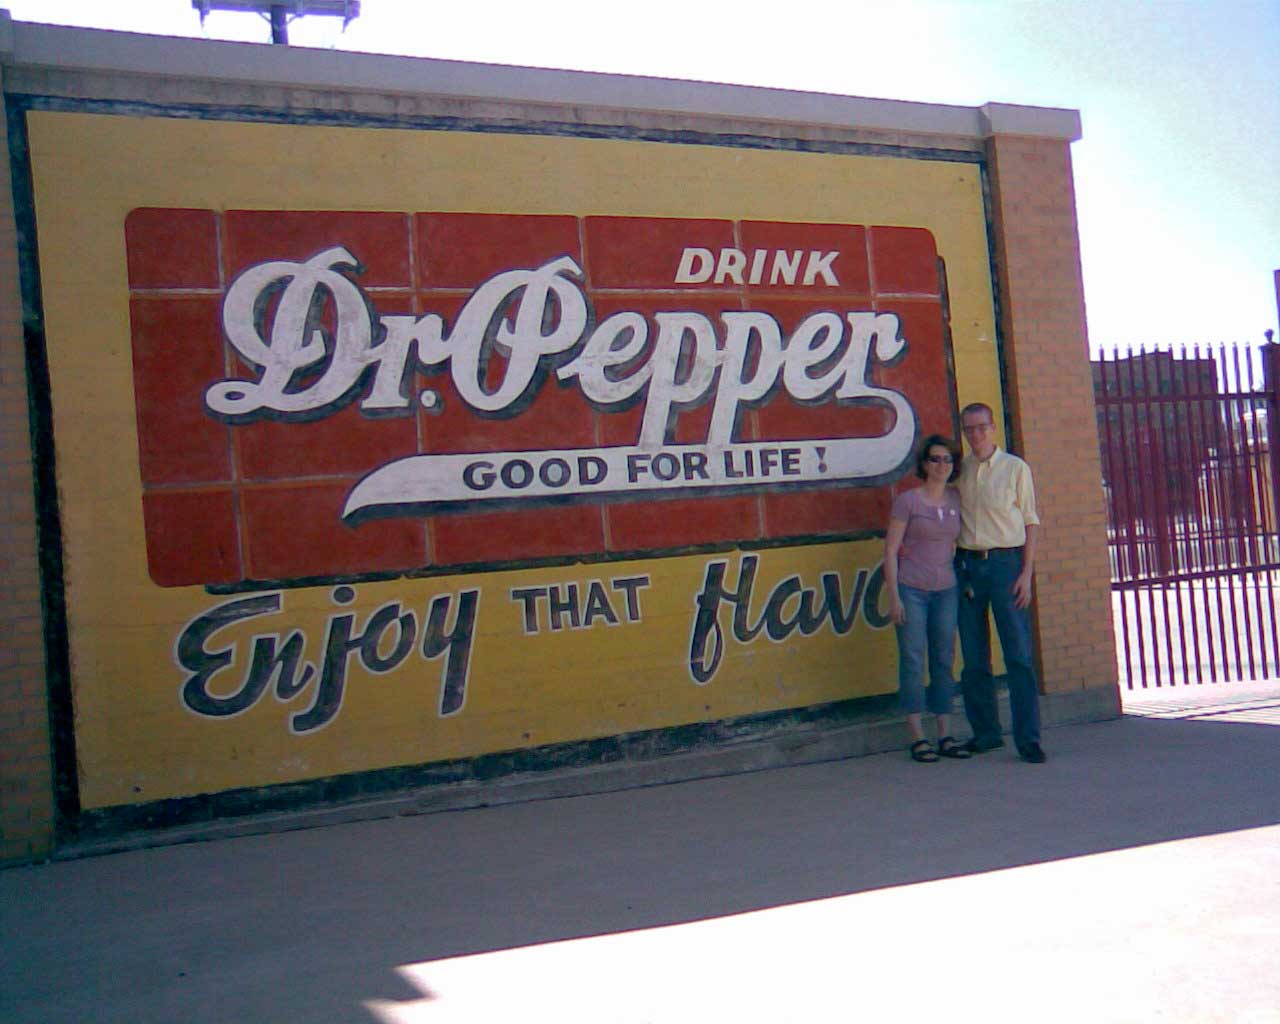 William and Rebecca at the Dr. Pepper museum